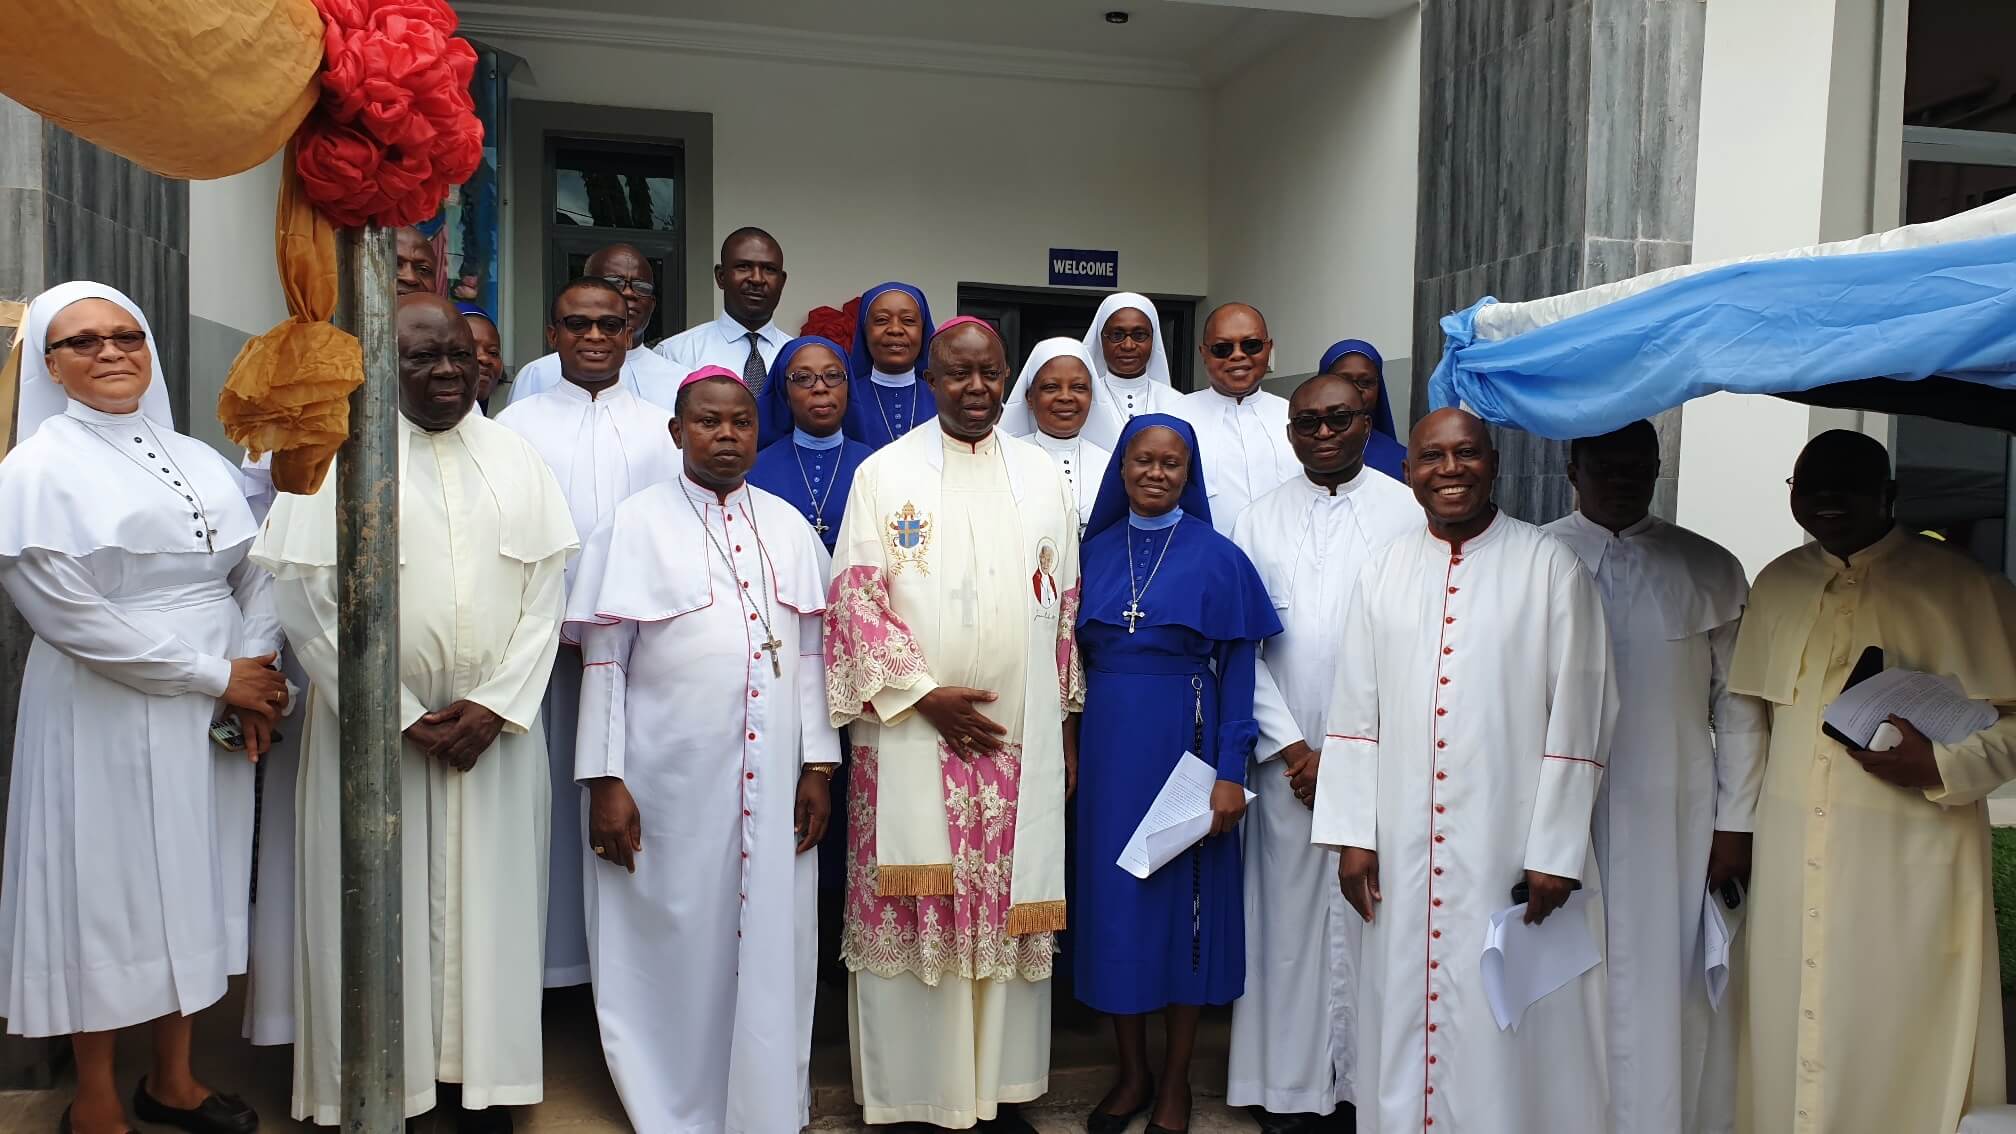 Bishop of Enugu Inaugurates Ave Maria Eye Clinic, a CIDJAP Development and Health Initiative, to Tackle Community Health Challenges